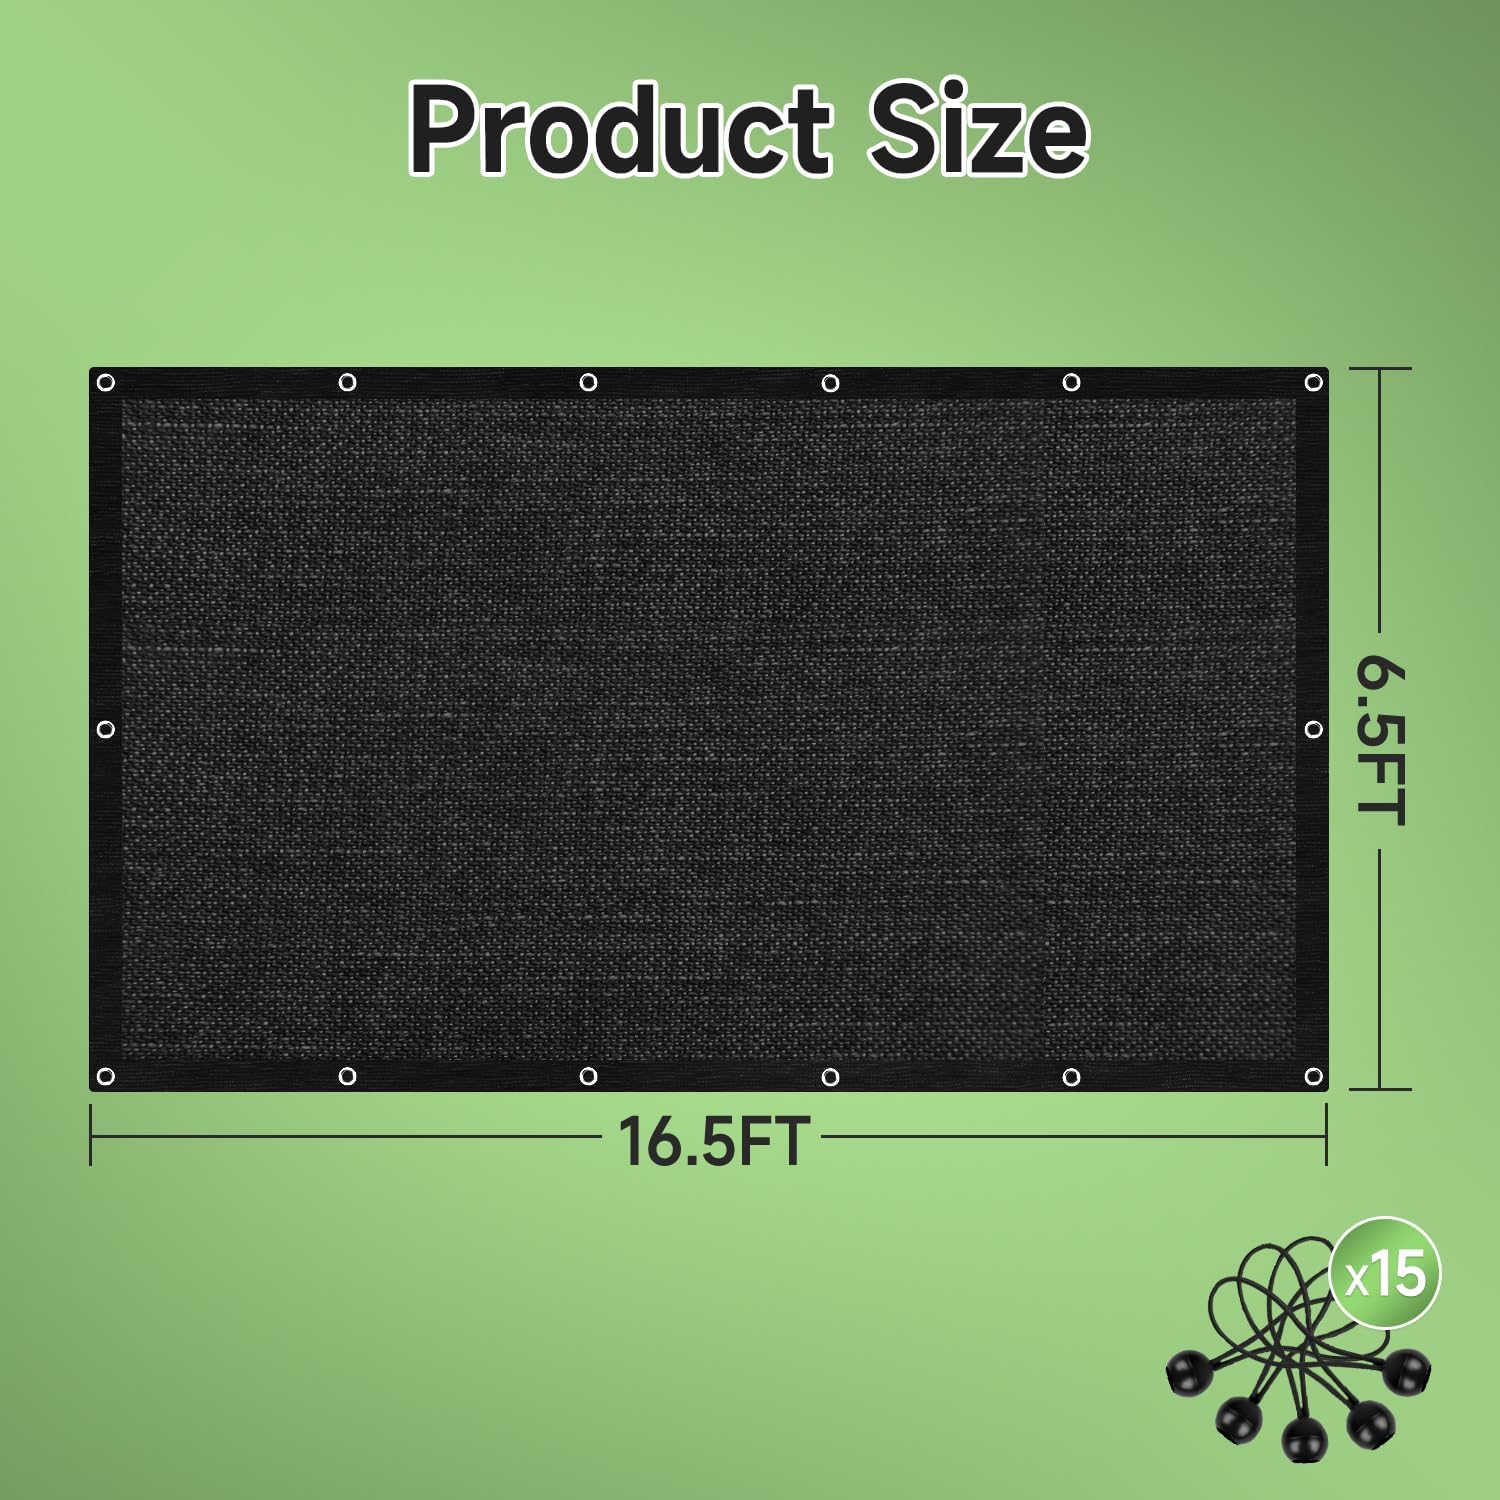 FOTMISHU 75%-80% Shade Cloth Anti-Aging 10ftx20ft Sun Mesh UV Resistant Net, Sunblock Garden Shade Mesh Tarp for Plant Cover, Greenhouse, Barn or Kennel, Flowers, Plants, Used for 3 Years or Even Long